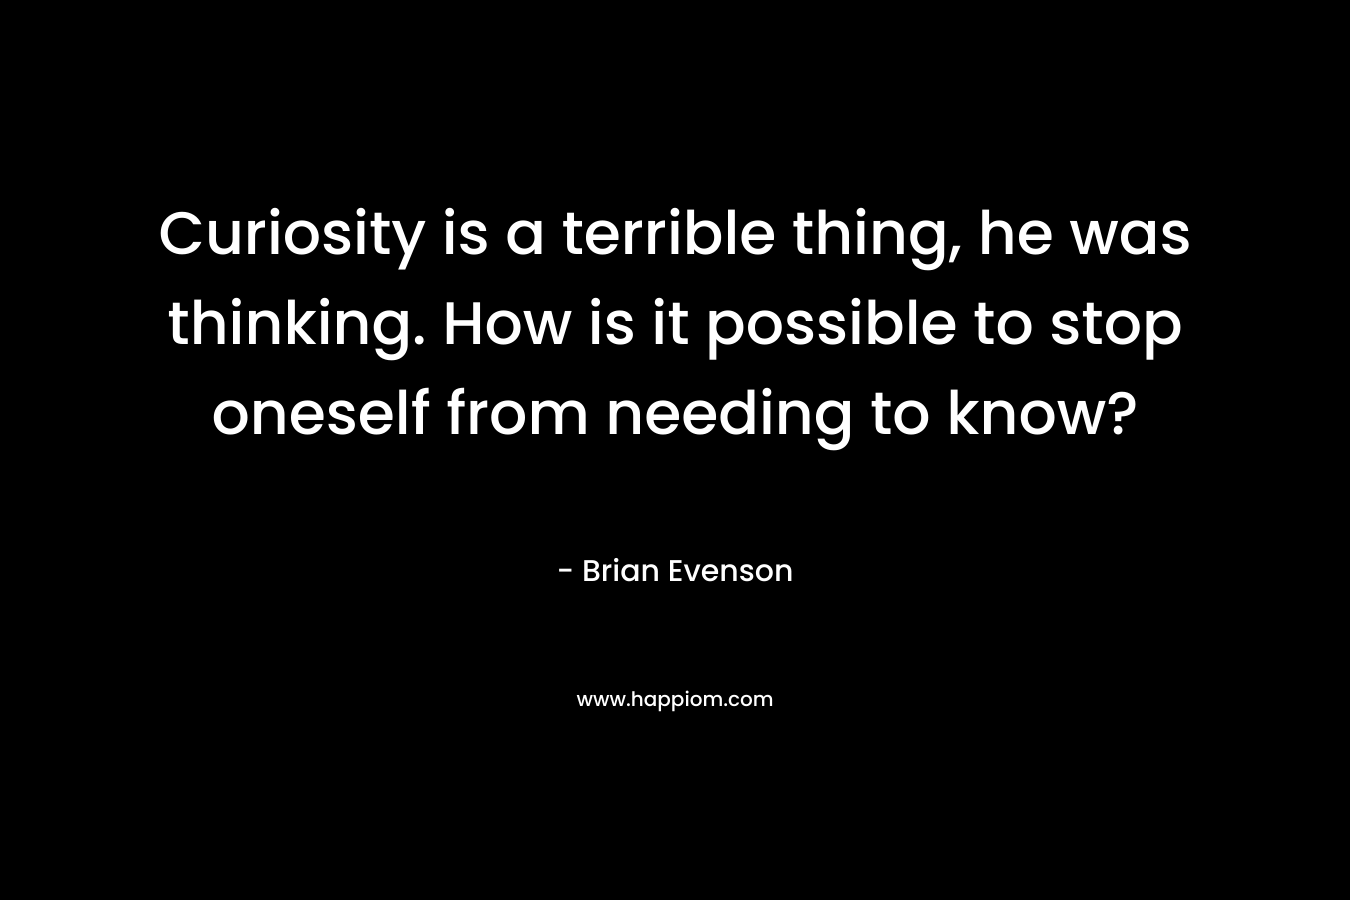 Curiosity is a terrible thing, he was thinking. How is it possible to stop oneself from needing to know? – Brian Evenson